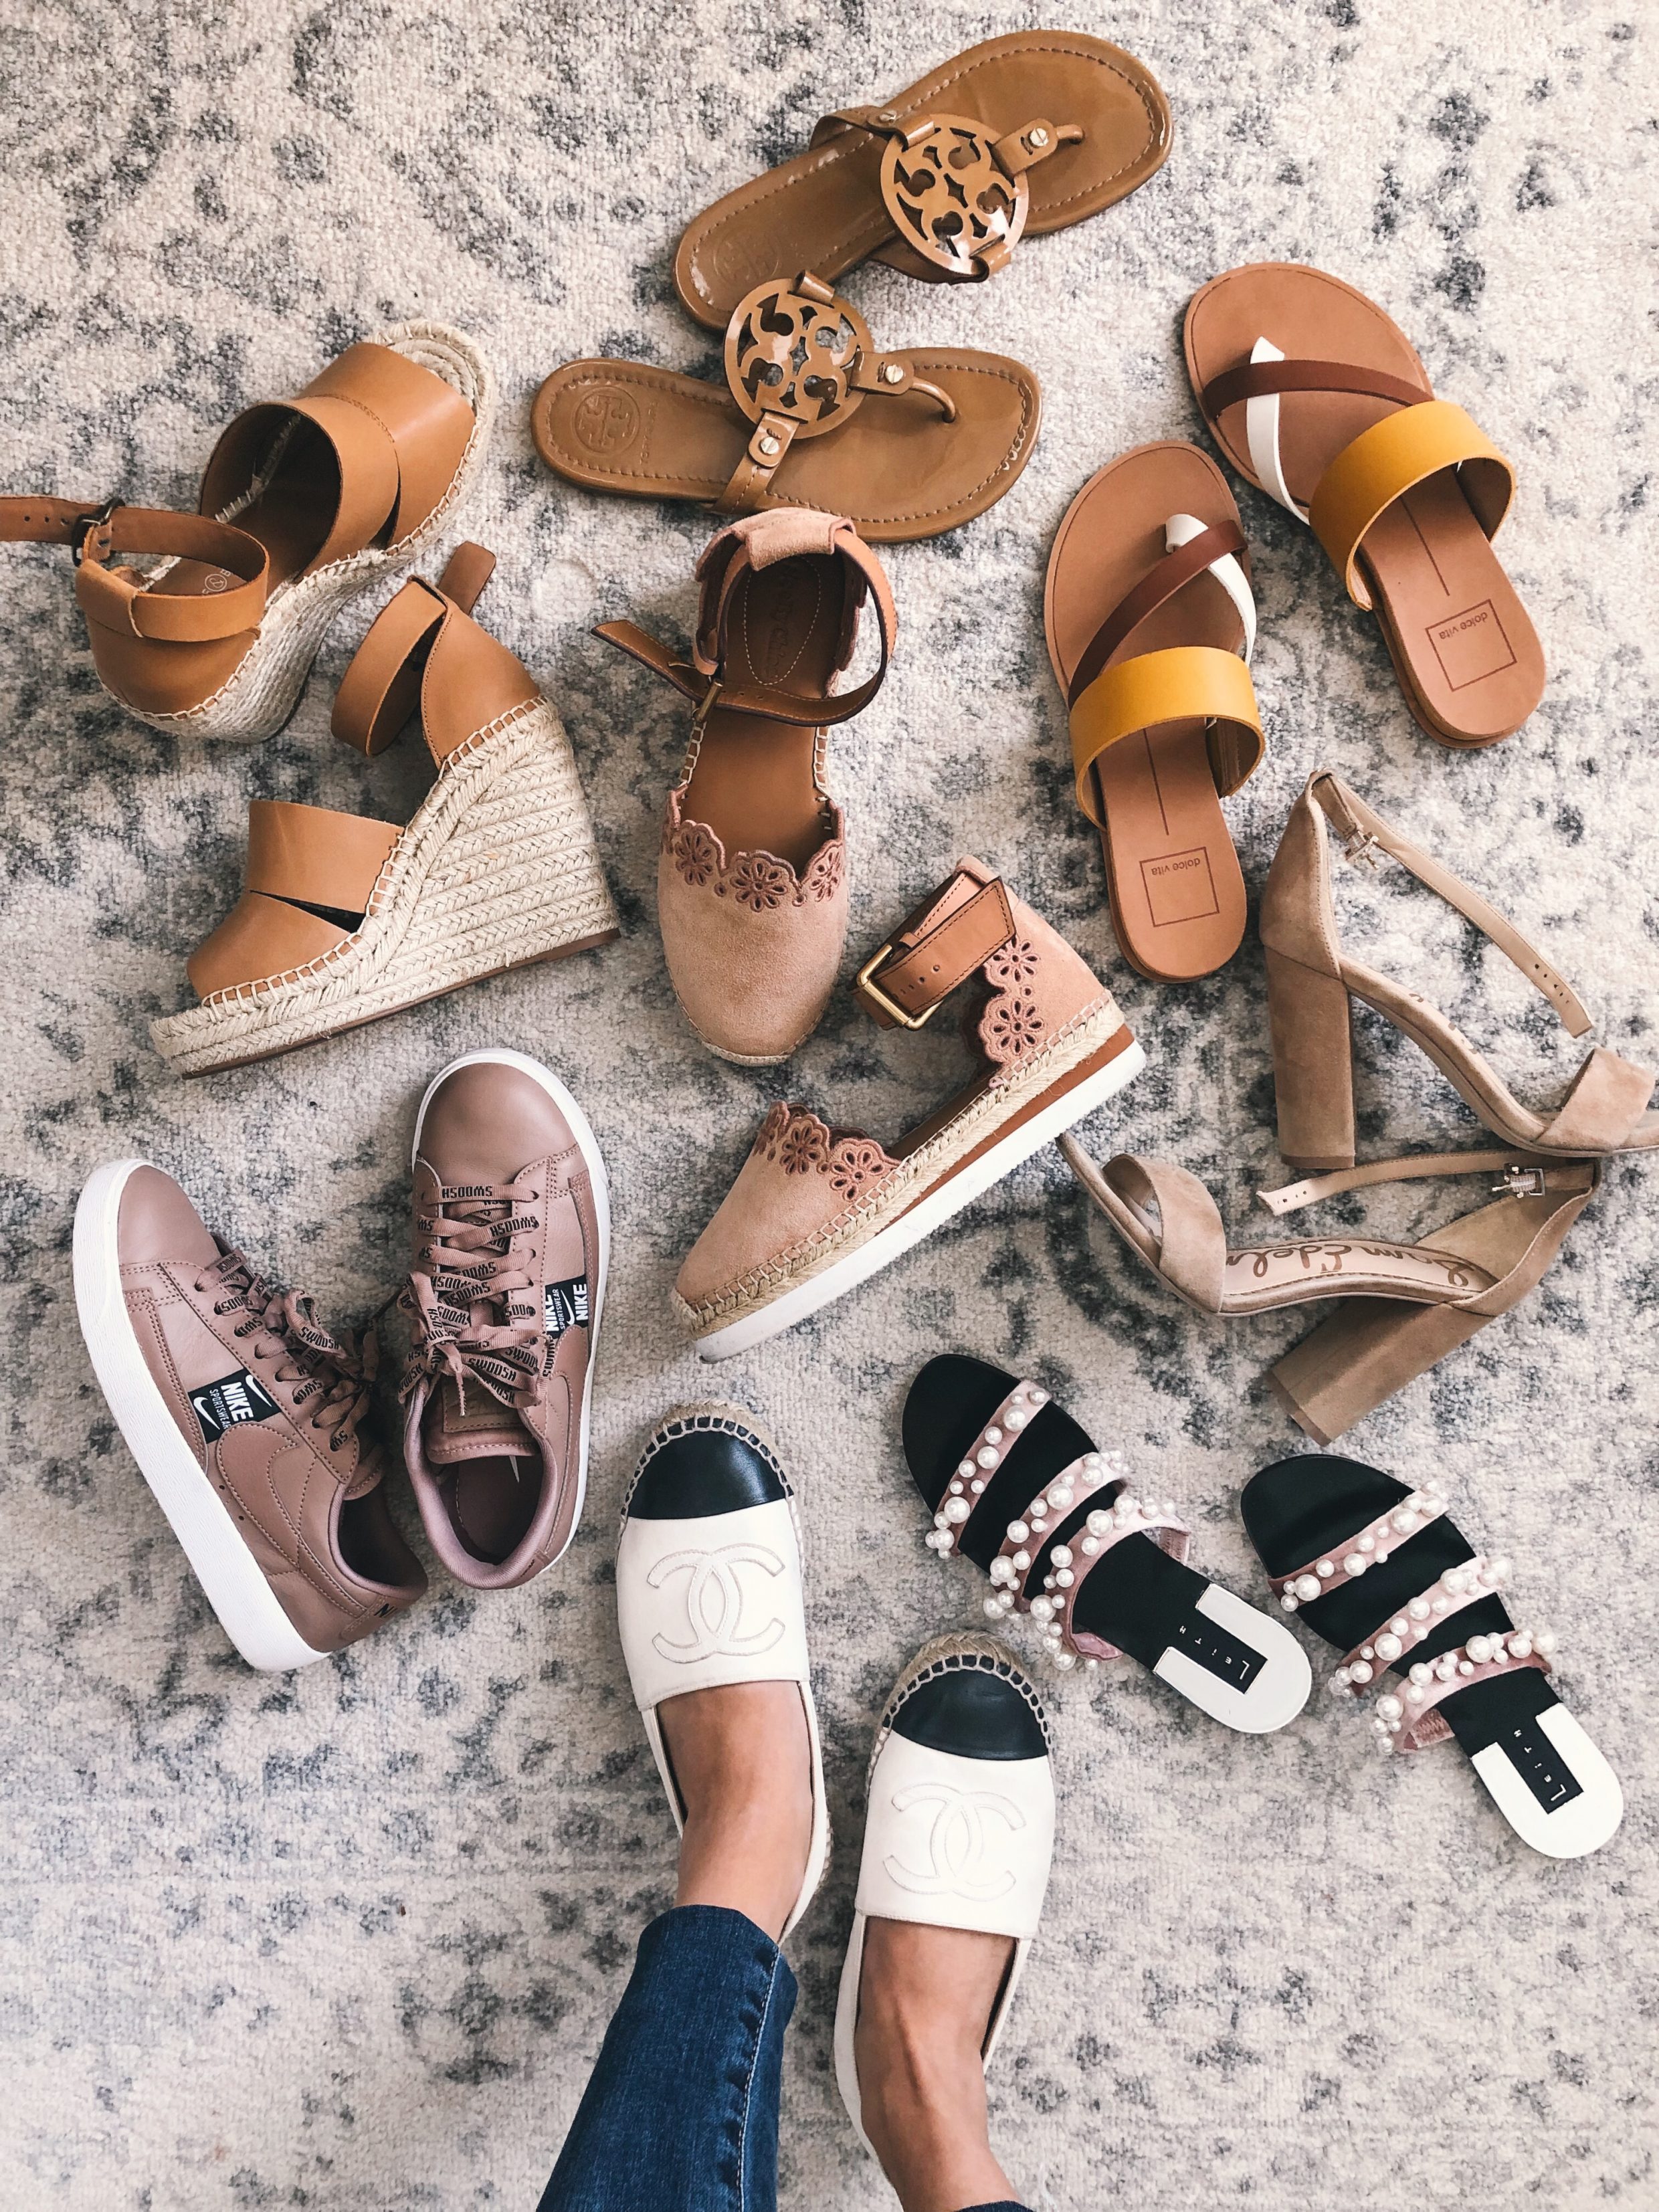 Museum Qualification Exercise The Best Shoes for Spring and Summer 2019 - Color & Chic